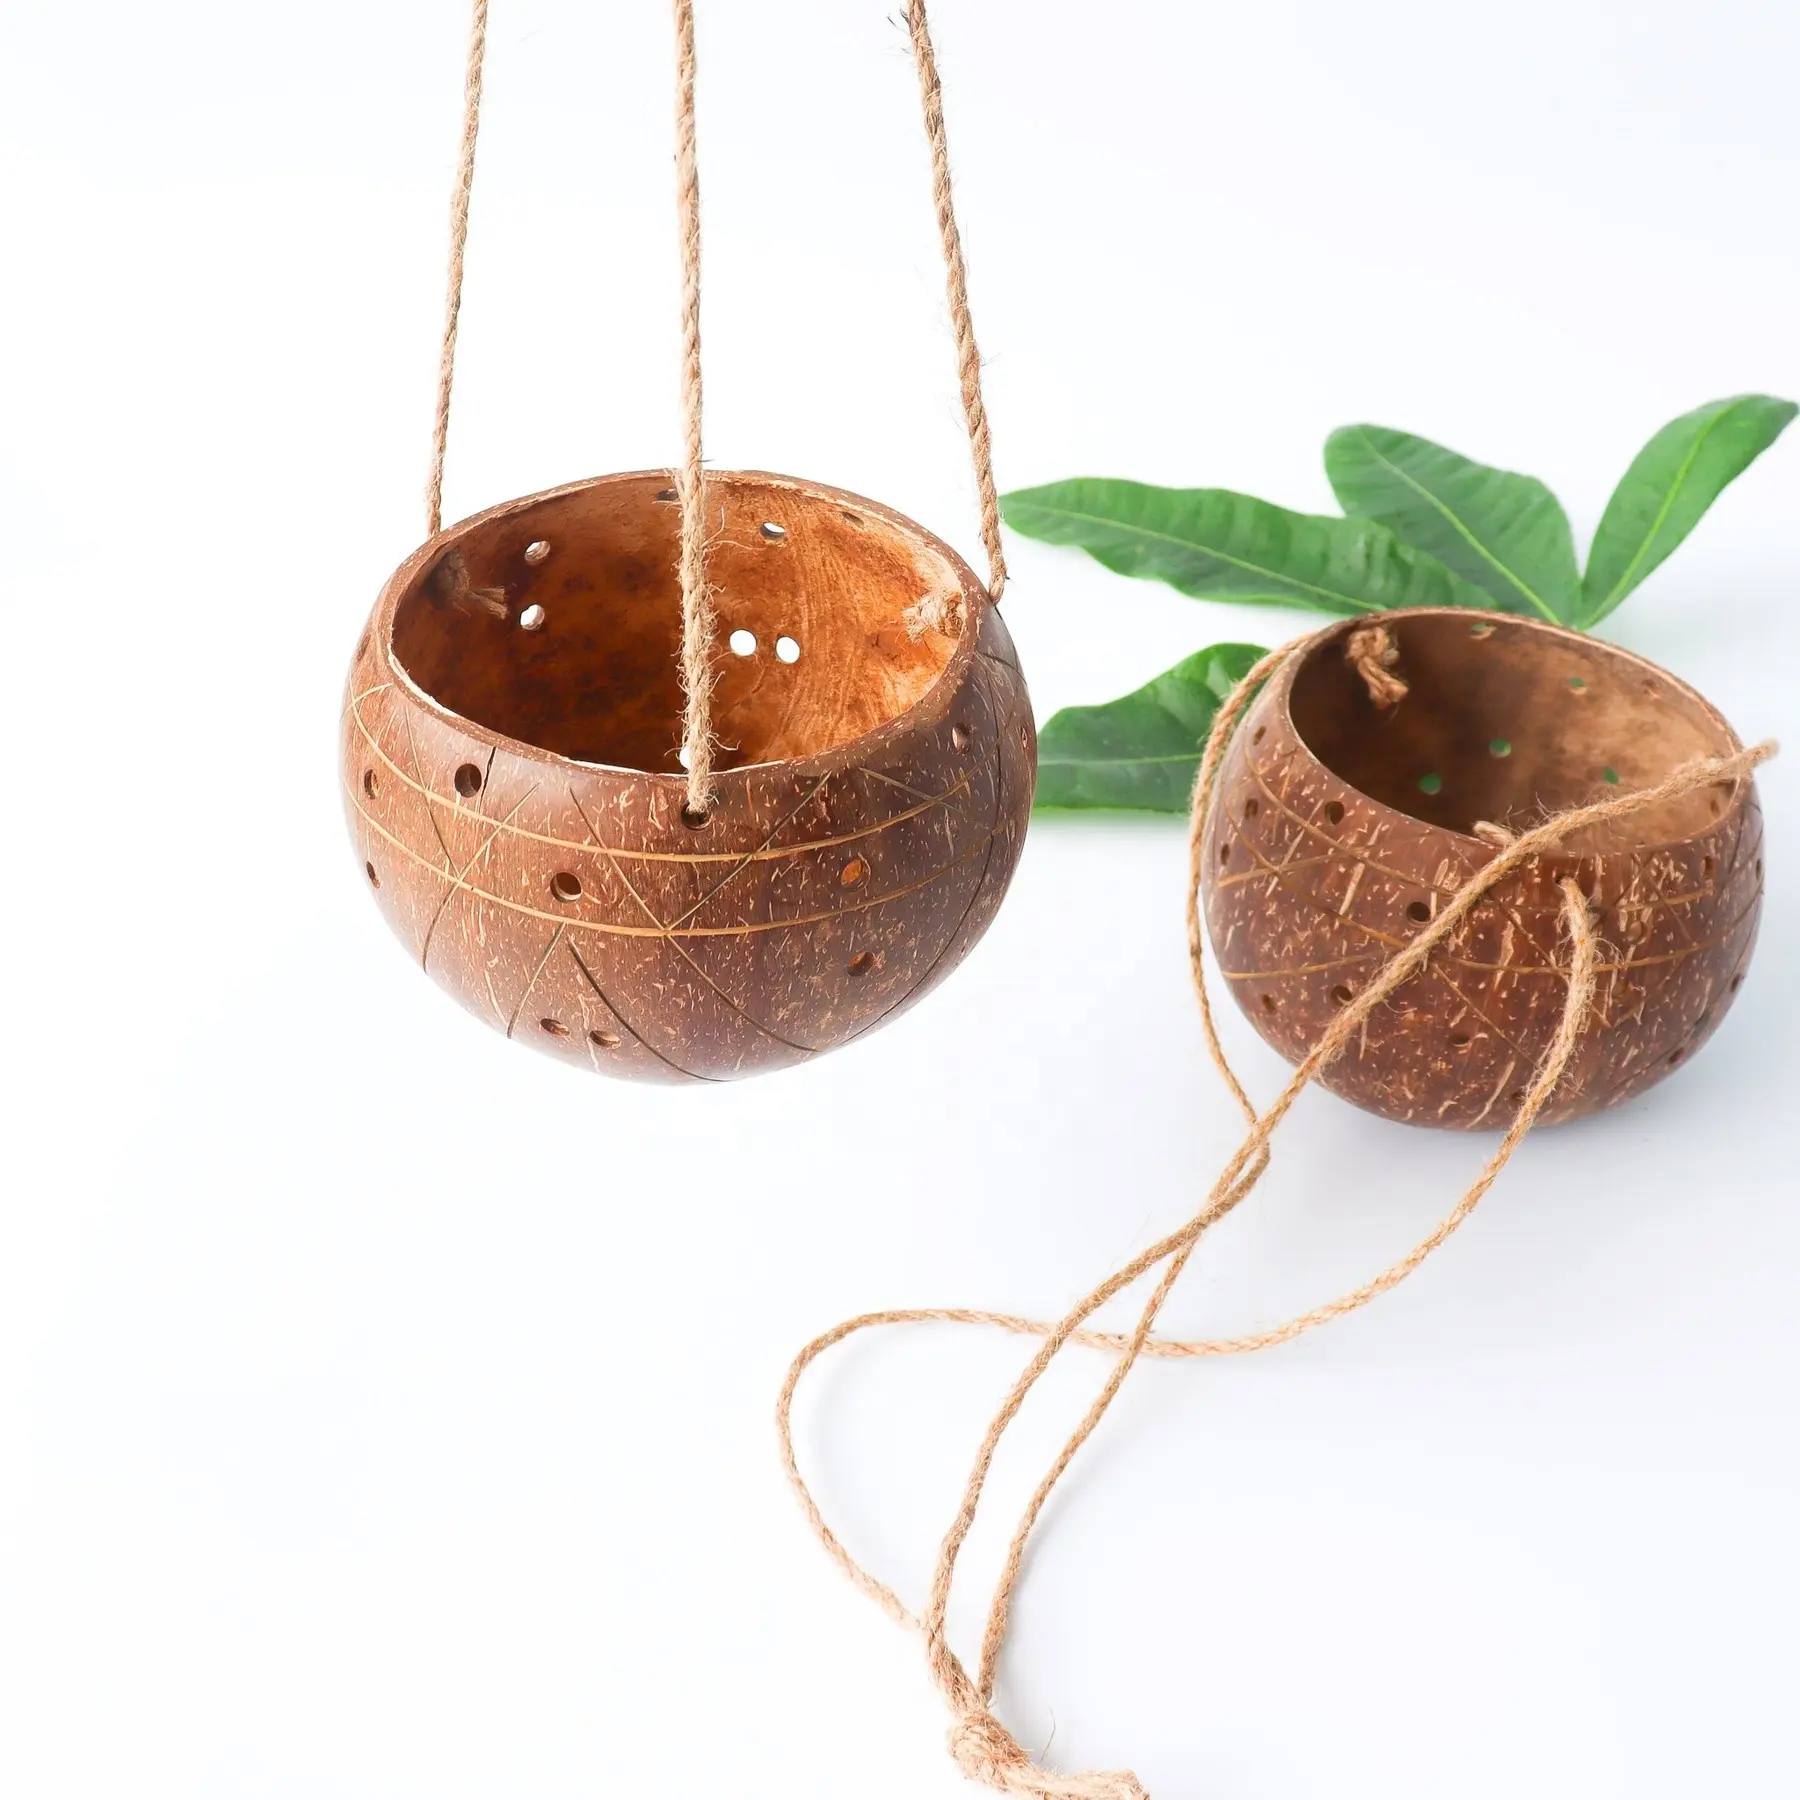 High quality natural Coconut Shell Hanging Planter Pot handmade indoor plants pots flower pots and planters in Viet Na